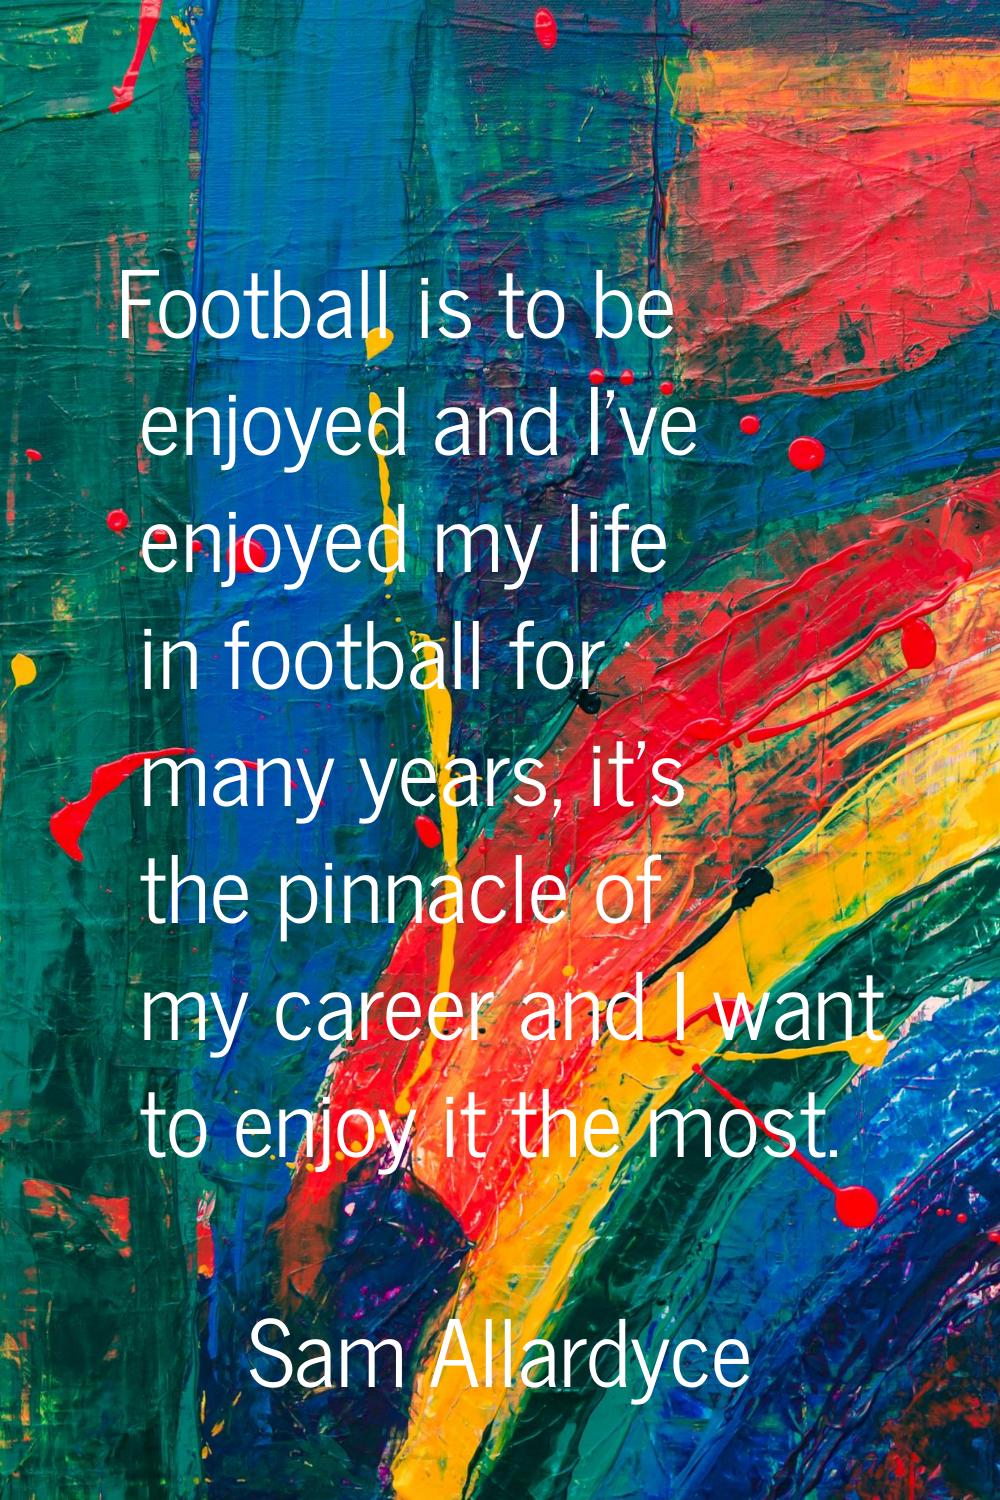 Football is to be enjoyed and I've enjoyed my life in football for many years, it's the pinnacle of